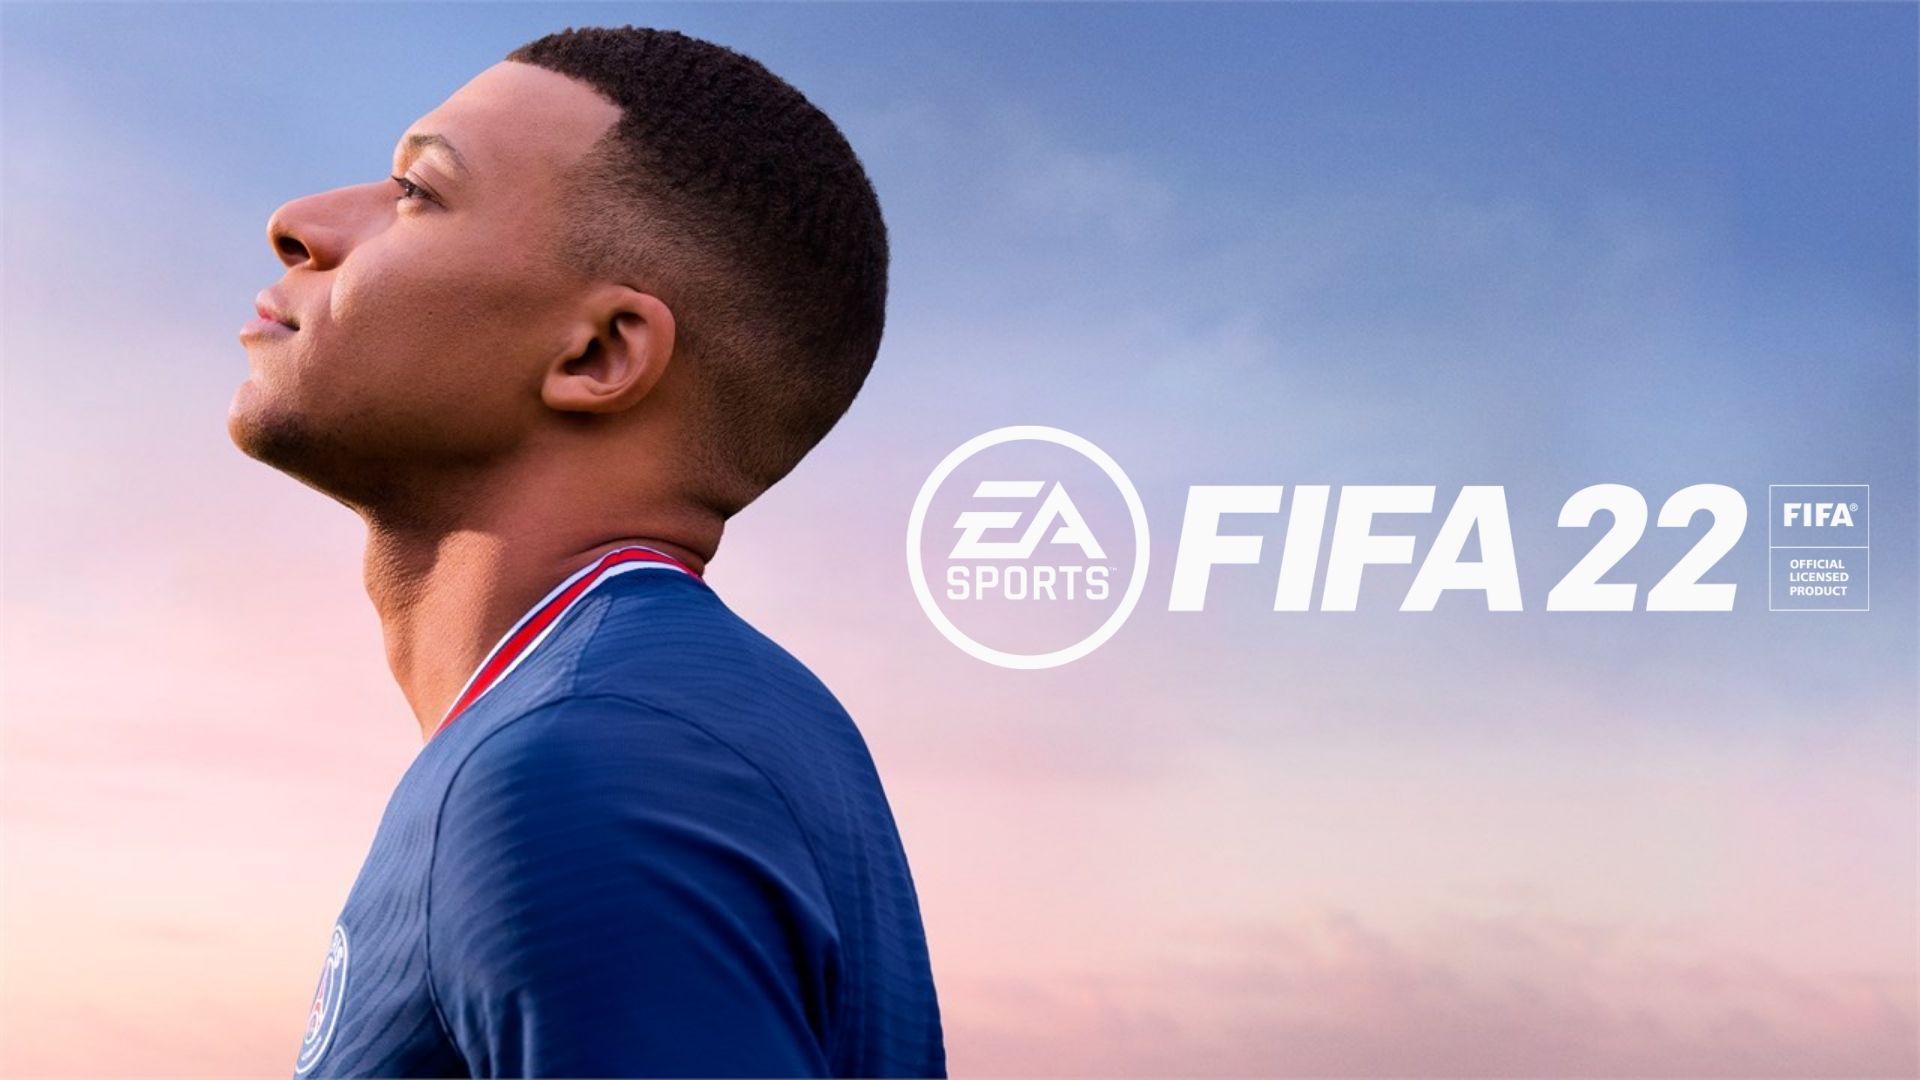 Tips & Tricks Presented Kioxia: 5 Things to Know Before Playing FIFA 22 - Don't Play Play - Just Score Can Already